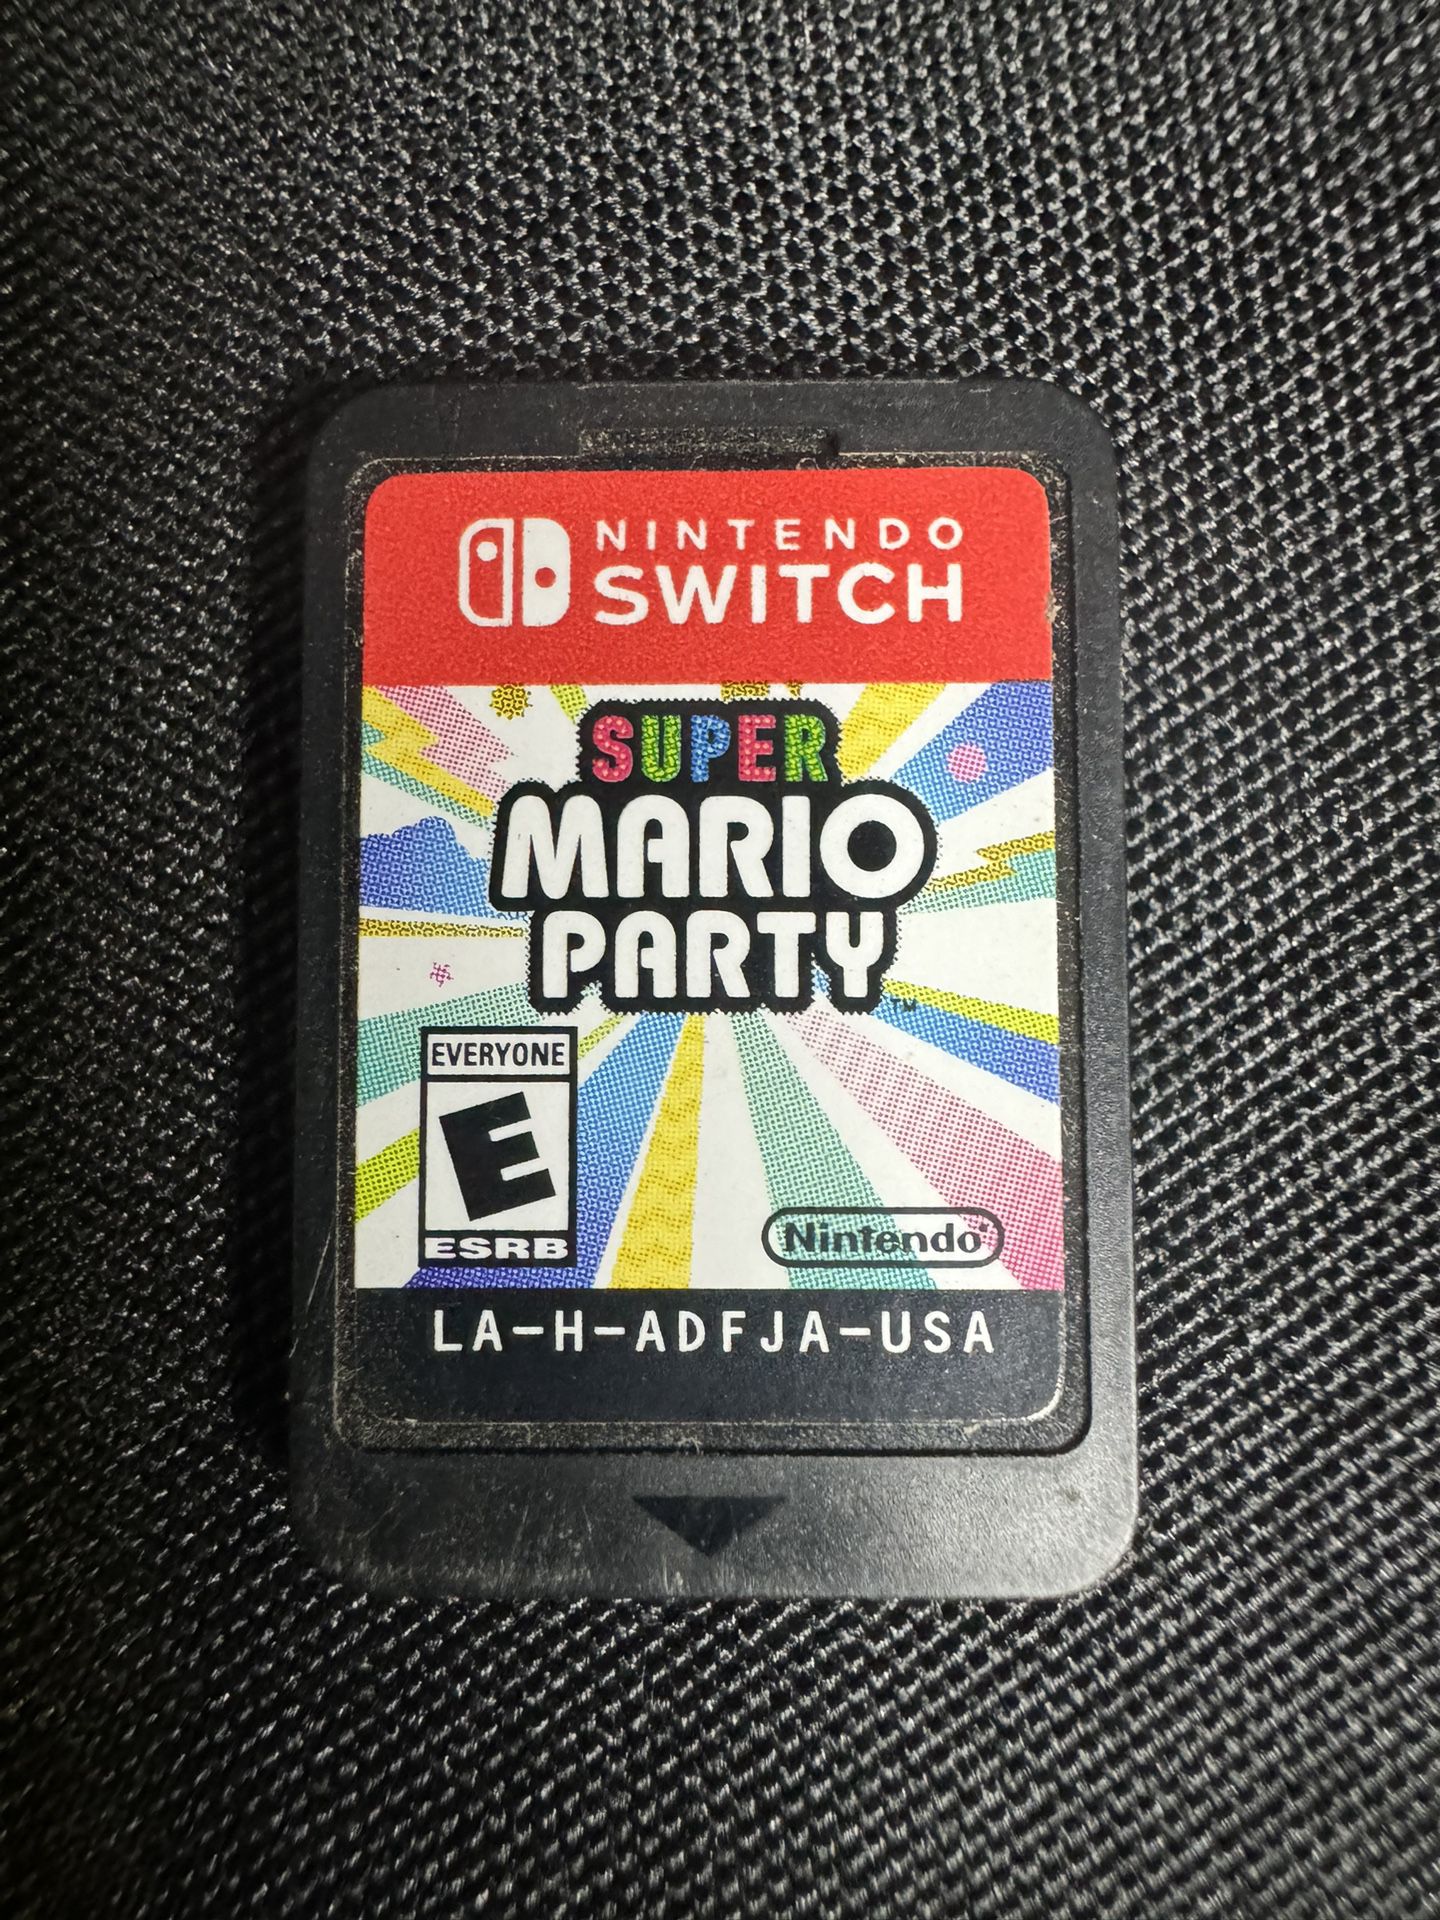 Super Mario Party - Nintendo Switch cartridge only works great